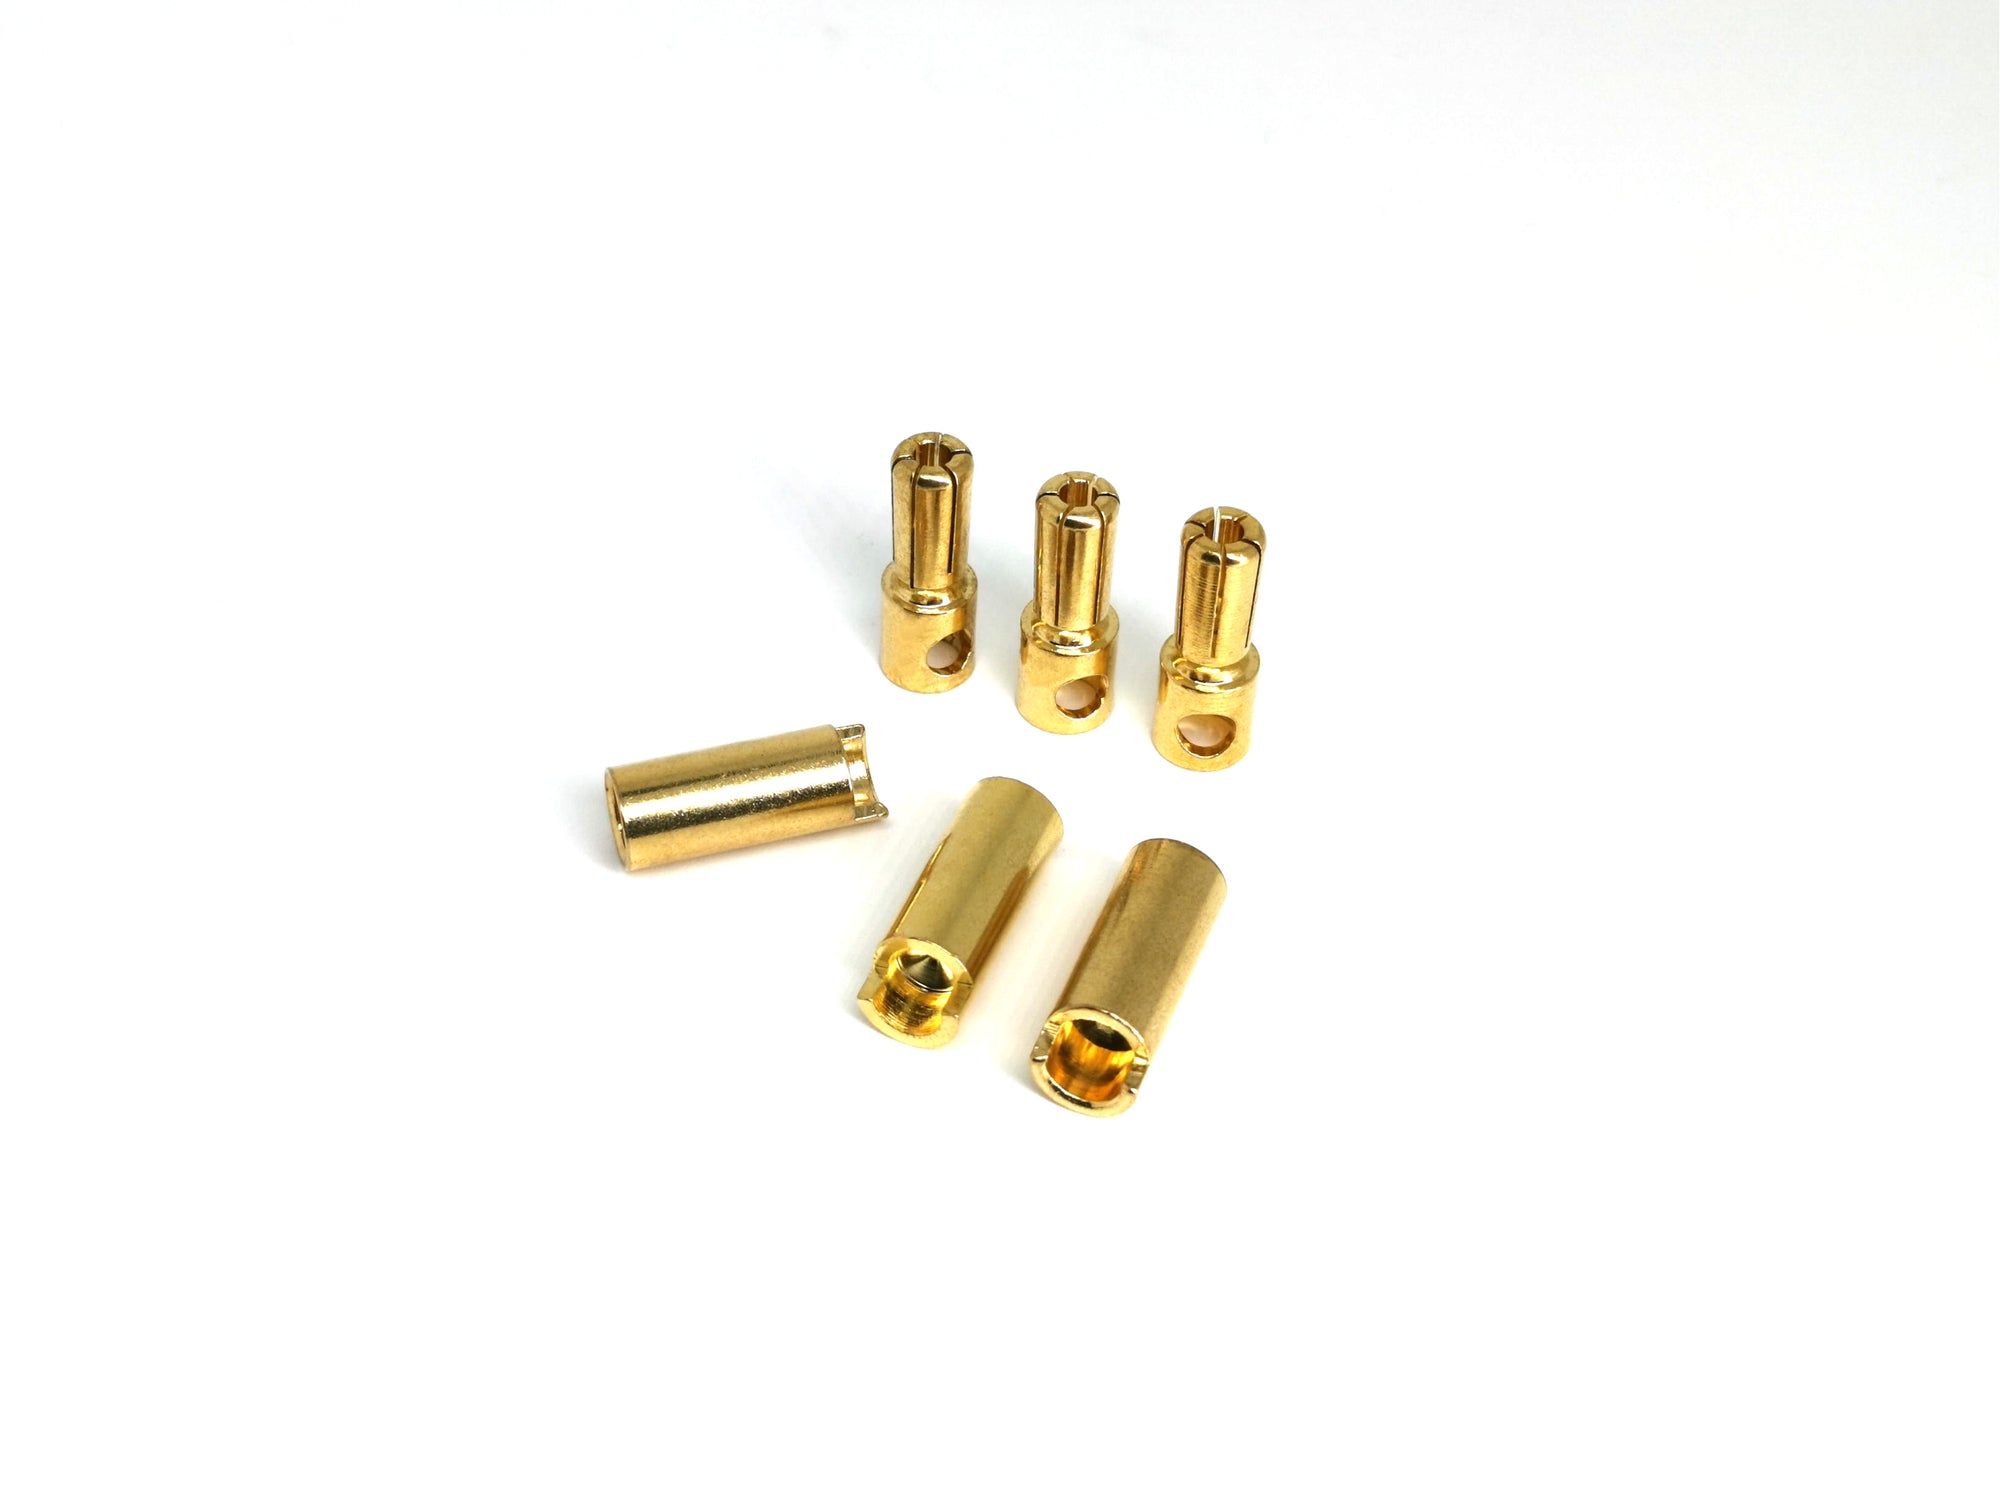 5.5MM  Bullet connector    3 pairs  Price